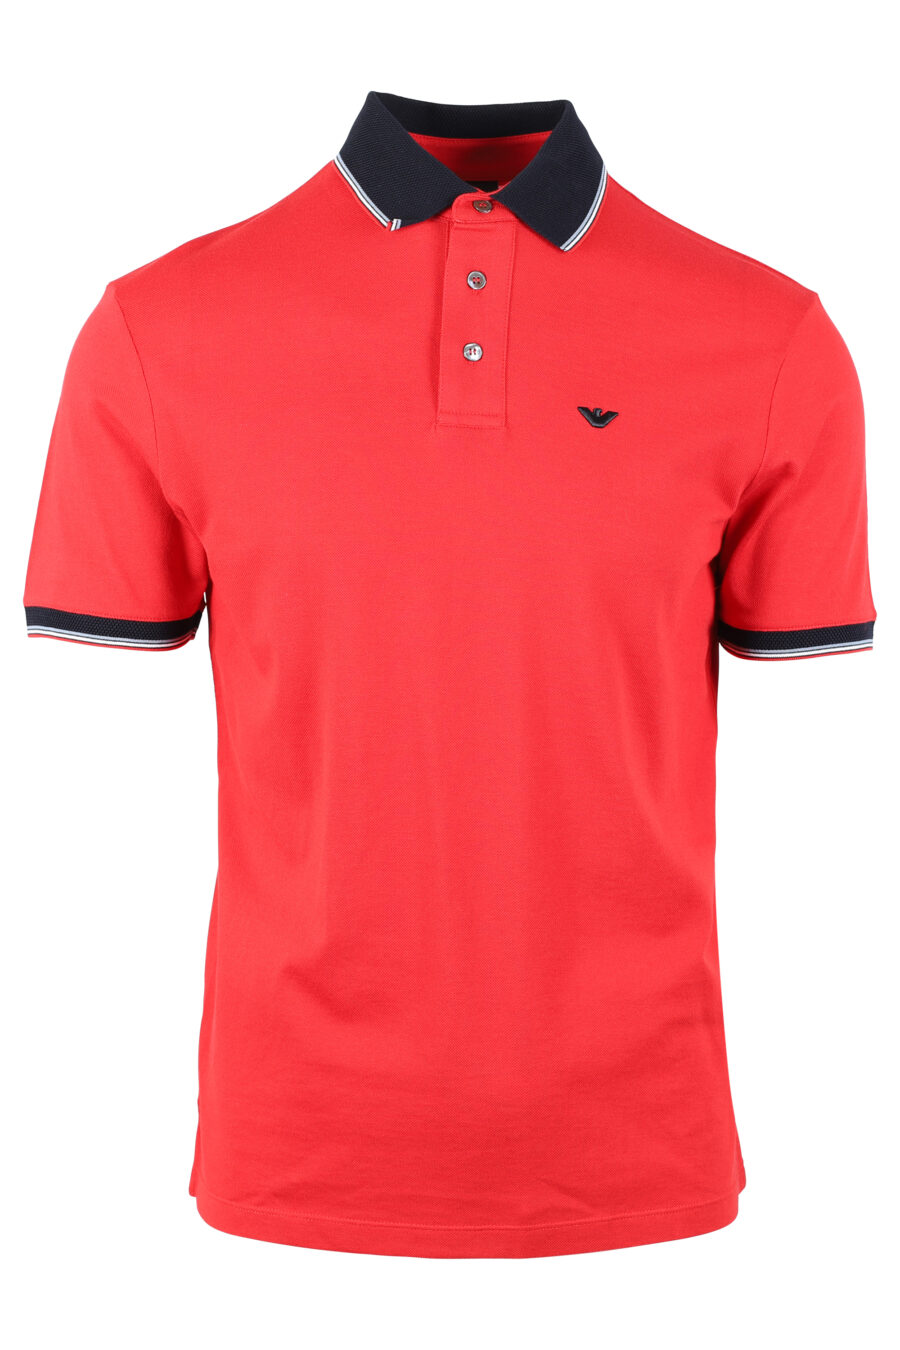 Red polo shirt with black and eagle mini logo - IMG 4744